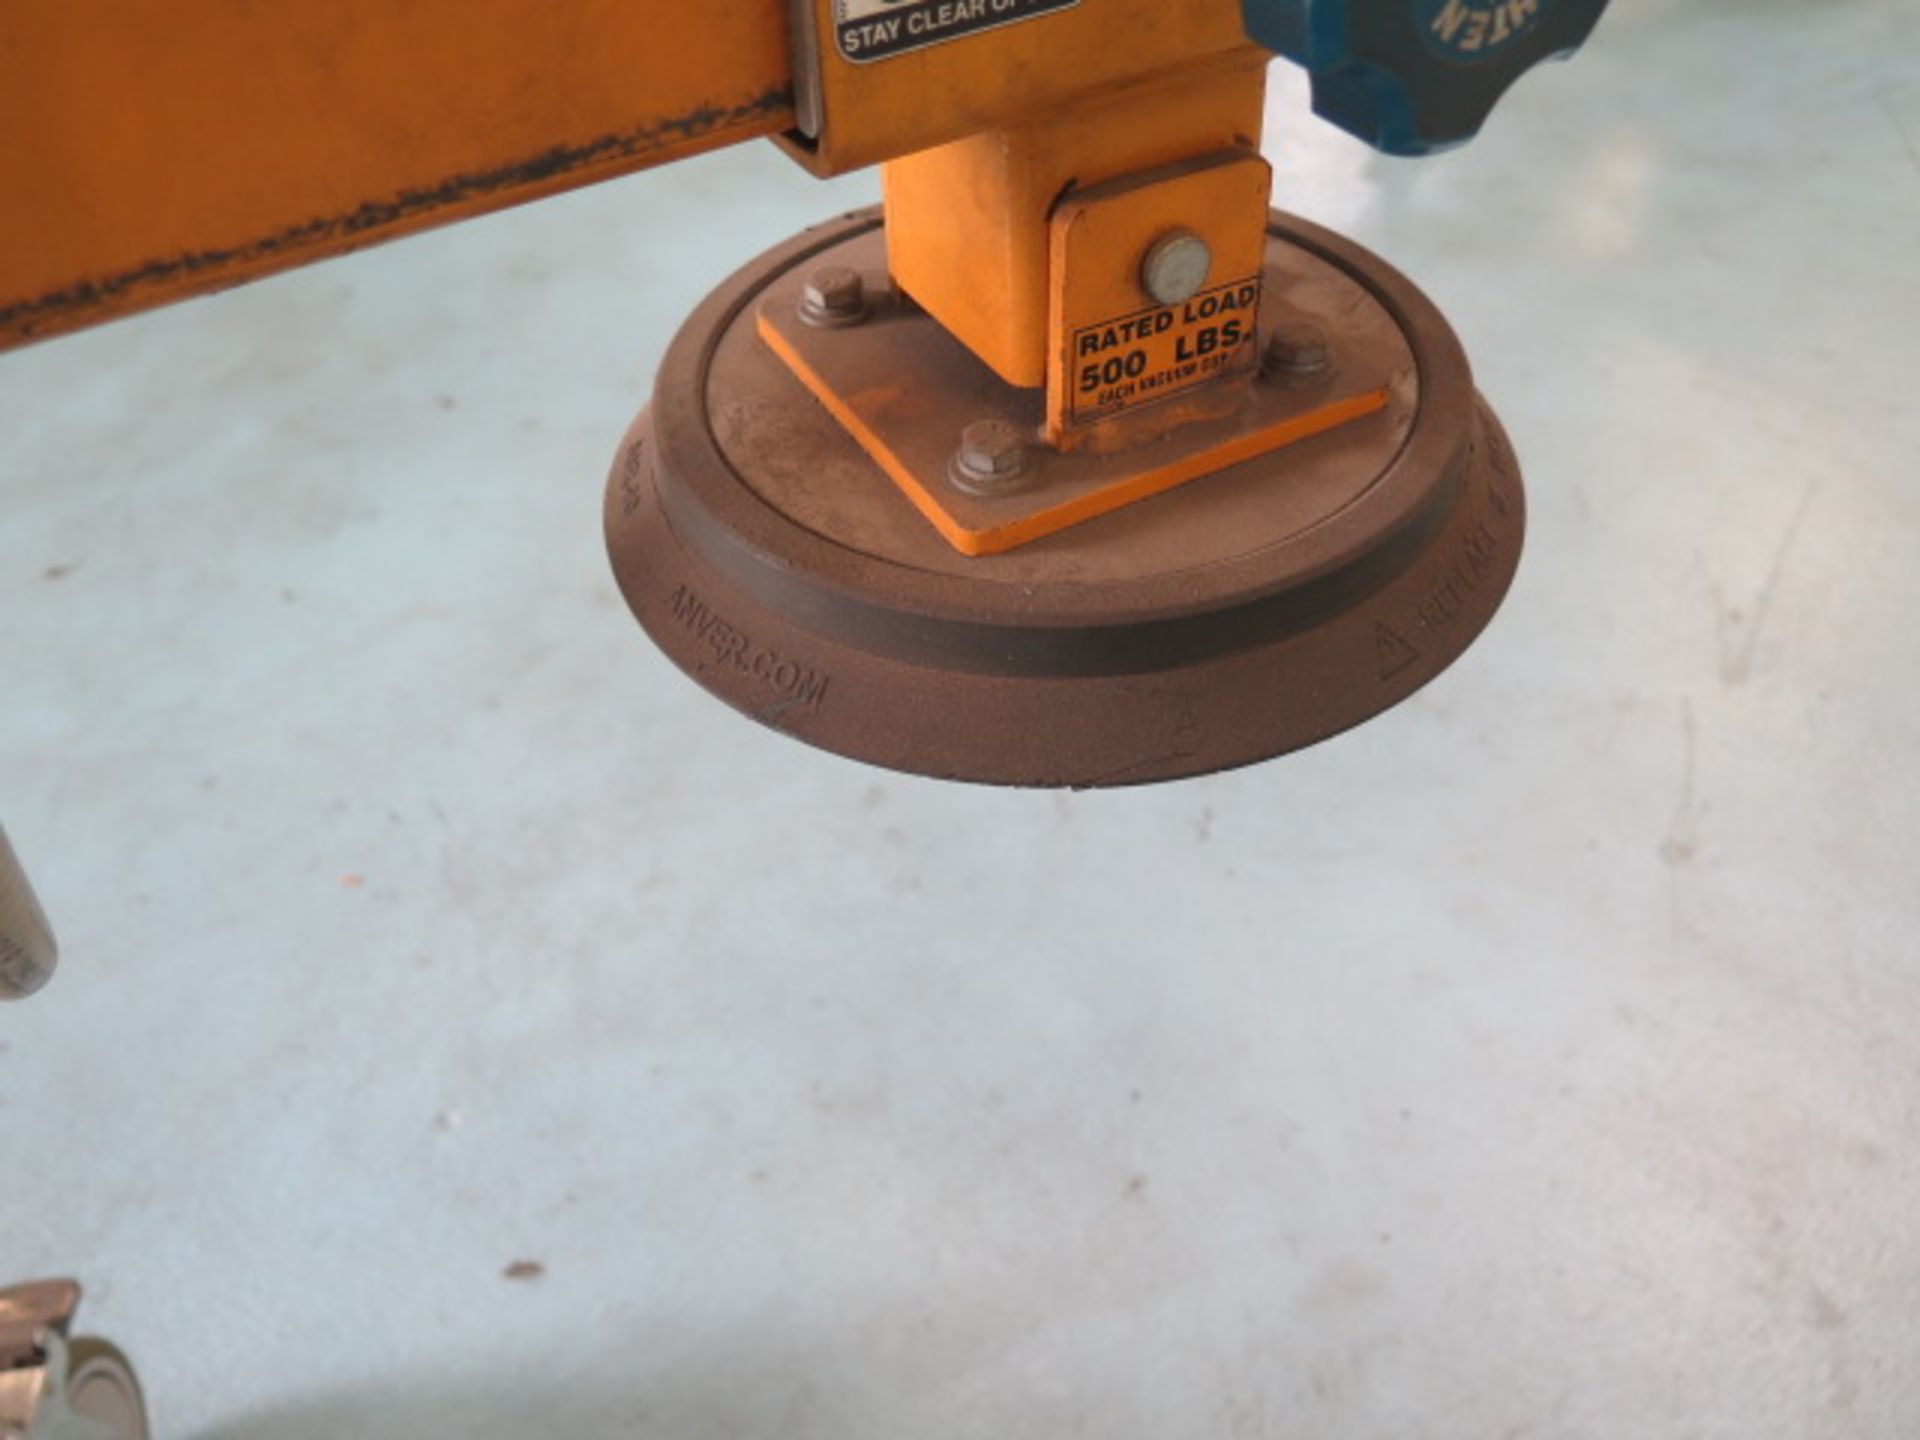 2008 Anver mdl. M100M-L3P/6P W/L75M3-110 750 Lb Cap Mechanical Vacuum Lifter s/n S0080001472 w/ - Image 6 of 7